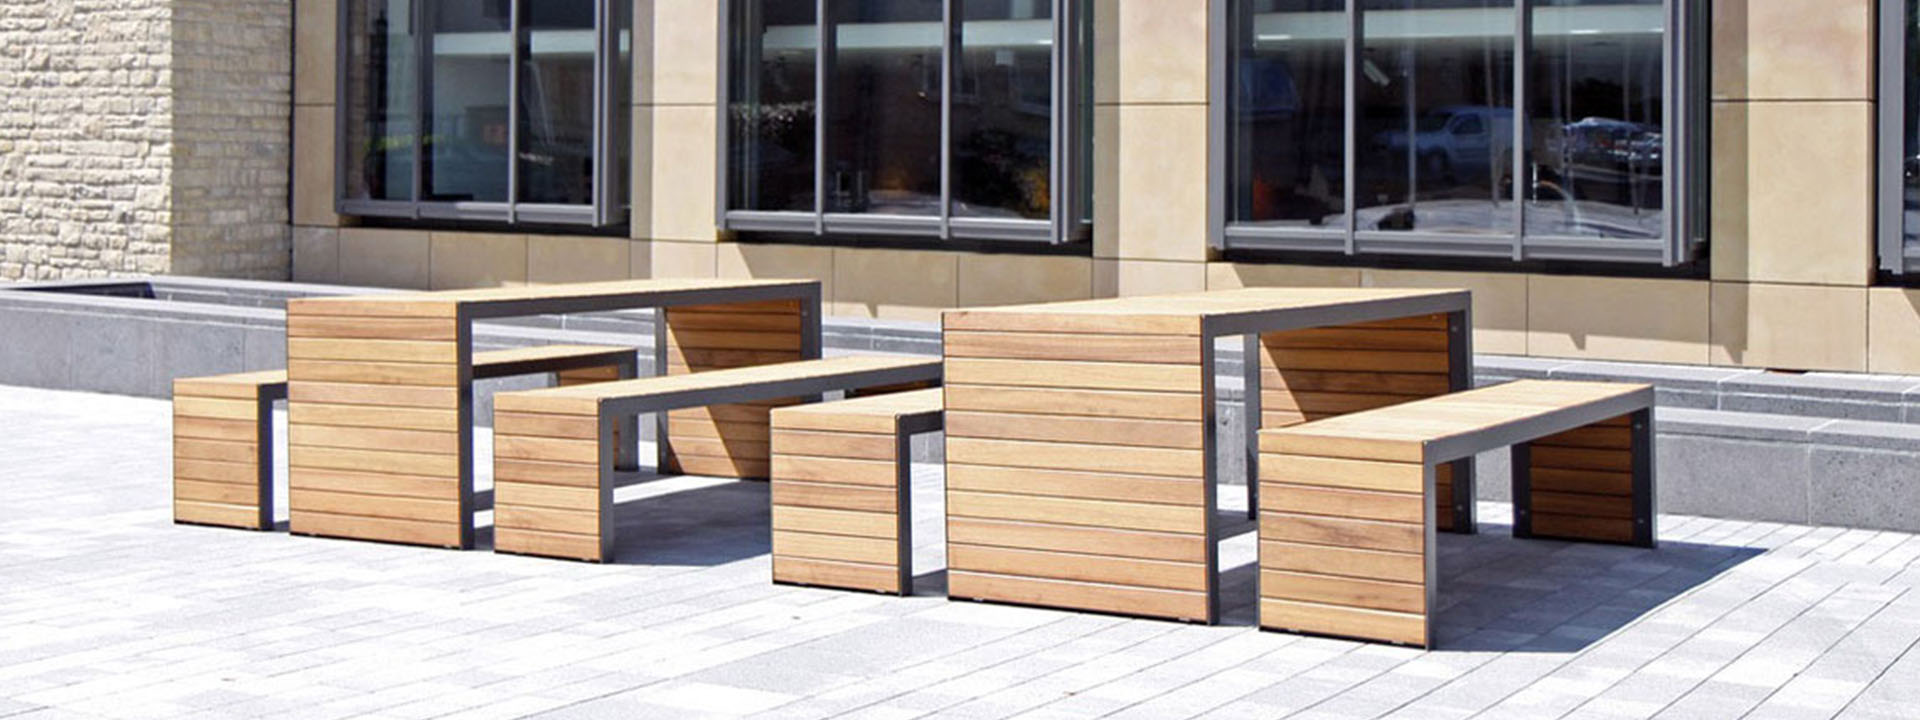 The Linares Range of outdoor tables & public seating